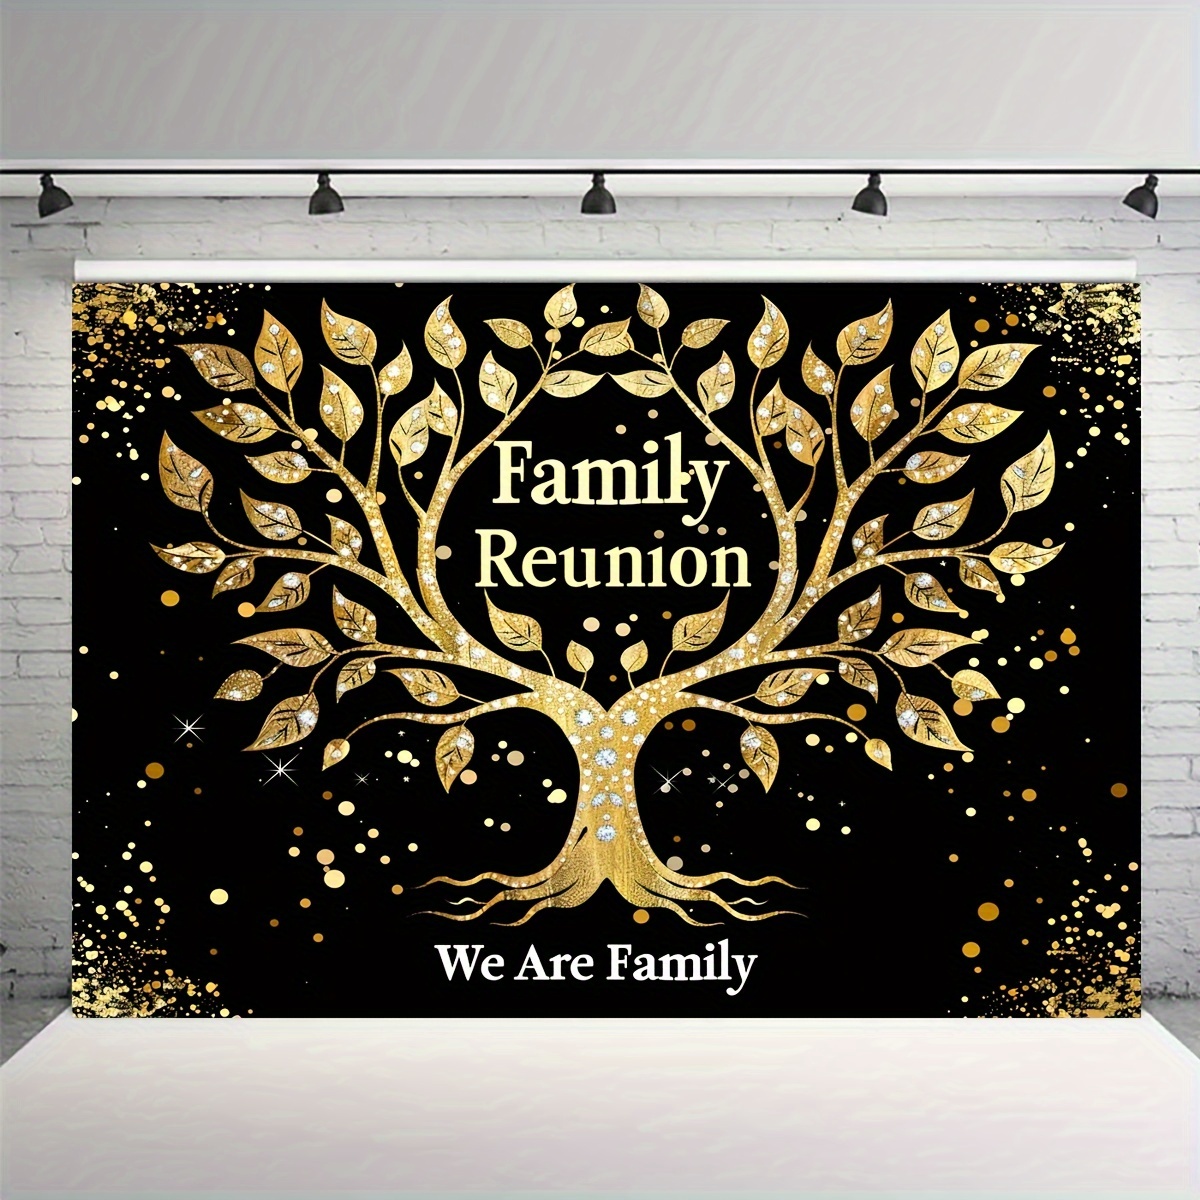 Family Reunion Backdrop Banner – Polyester Black and Gold Family Tree Party Decoration, Multipurpose Photo Background for Gatherings, Fall and Winter Holiday Events, No Electricity Needed – 1pc